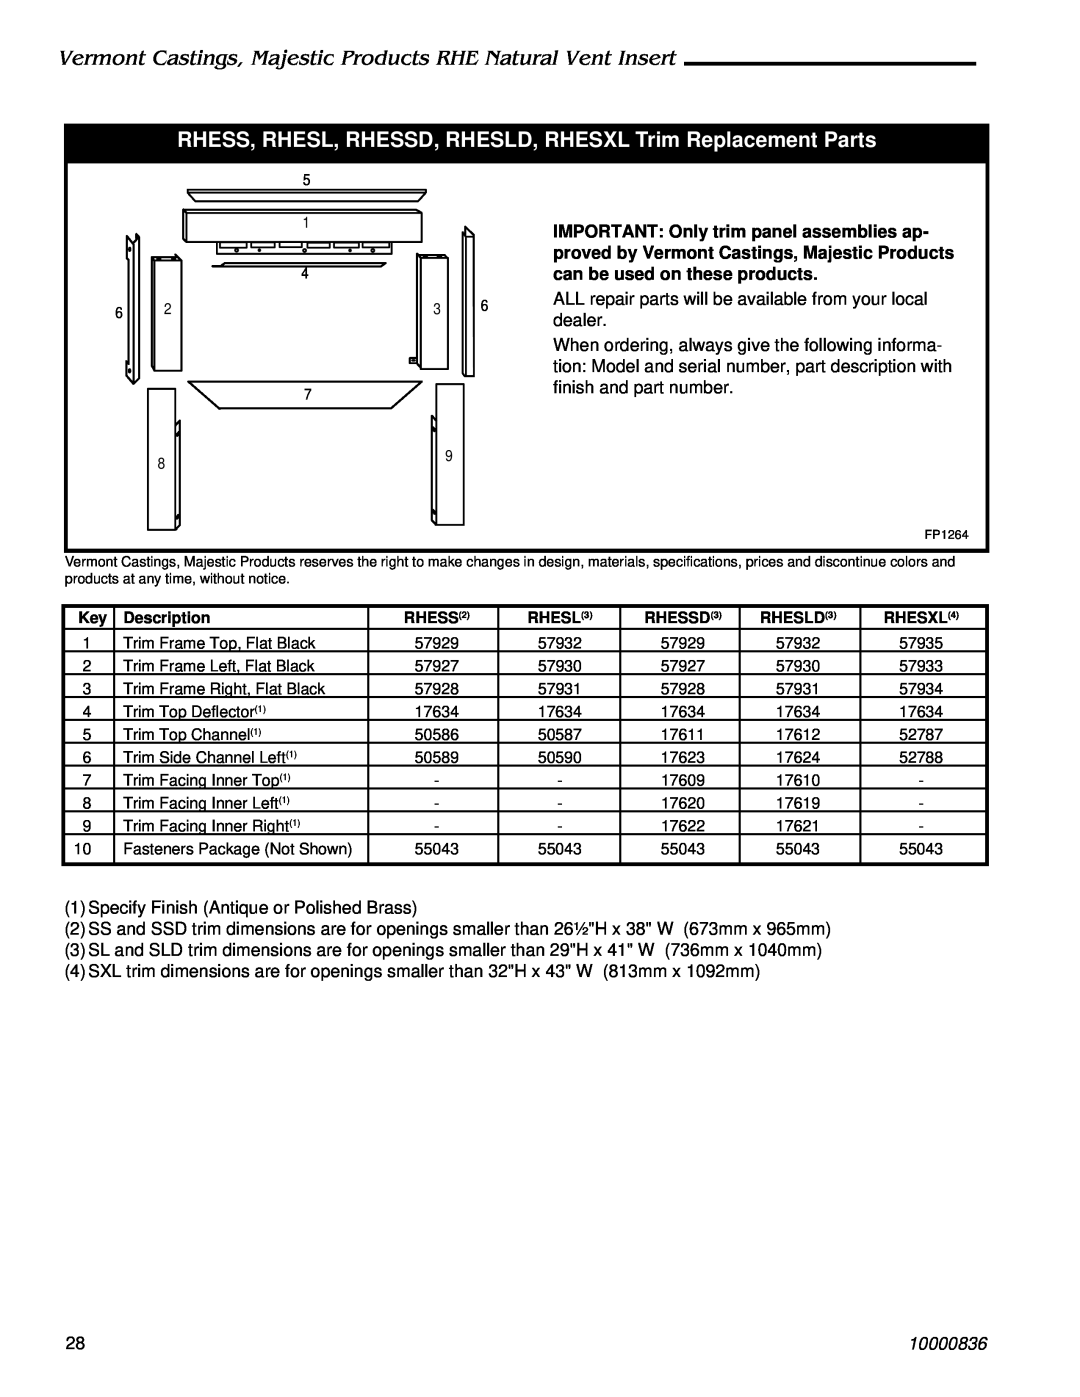 Vermont Casting RHE25 IMPORTANT Only trim panel assemblies ap, proved by Vermont Castings, Majestic Products, 10000836 